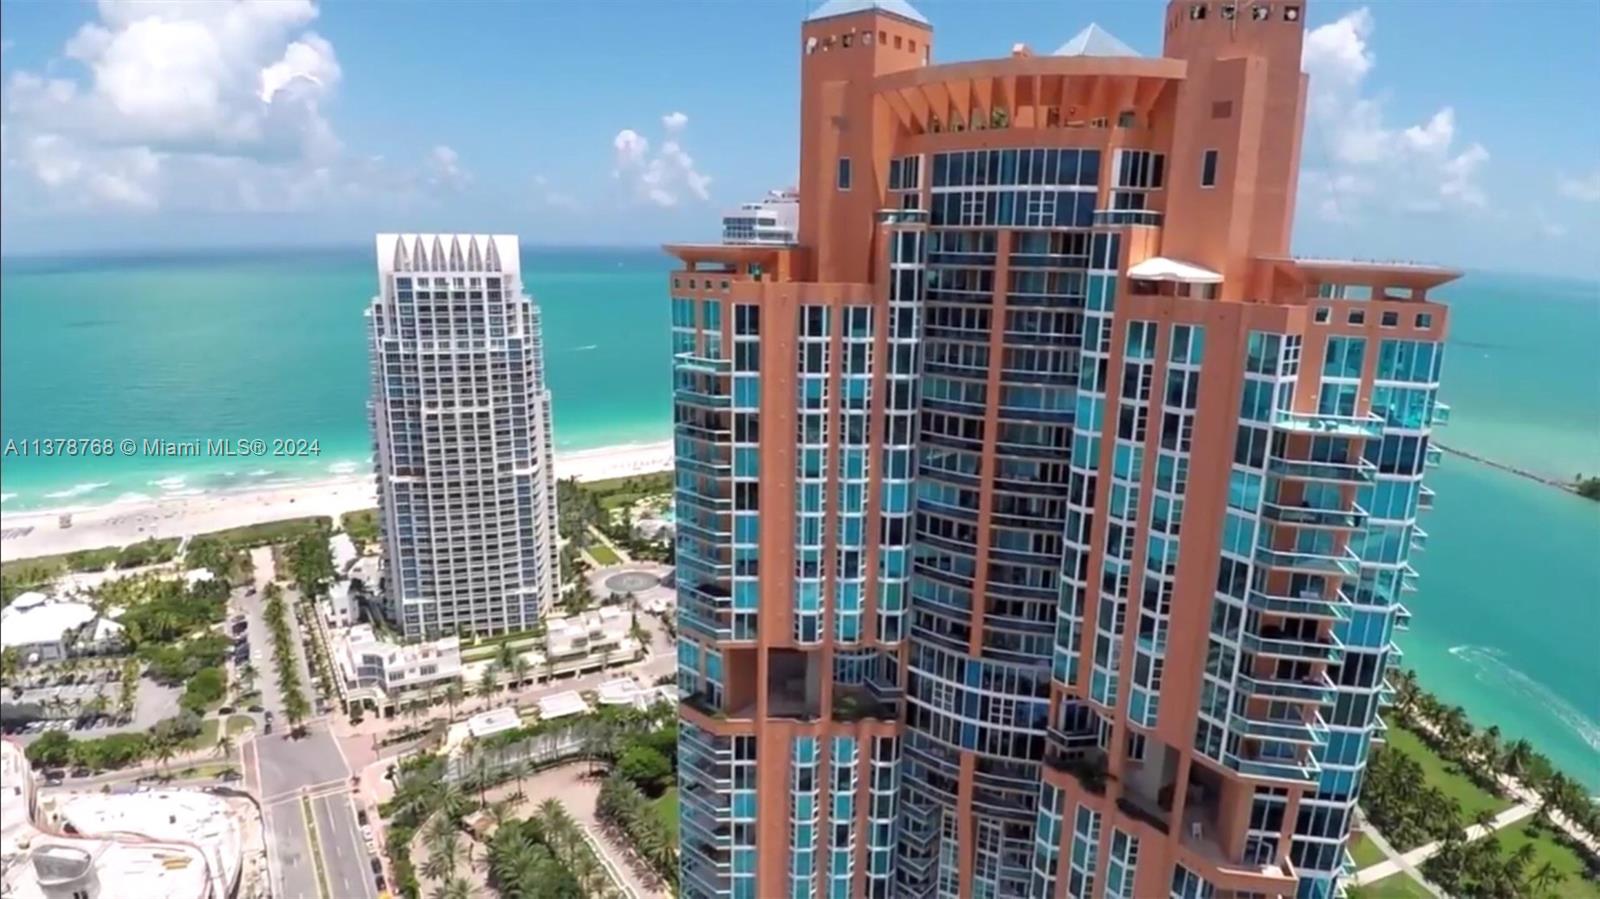 Miami Beach Direct Water views, rarely available 01 line at PORTOFINO TOWERS. Partially Furnished or avail. unfurnished. Amazing views, Sunrise and Sunset with Miami Skyline. Very exclusive building on South of Fifth, just steps from the Beach. Great service, concierge, security, shipping and receiving, valet parking and an outstanding GYM with 360 views of Miami !! Newly renovated Lobby and state of the art elevators. No short term please!